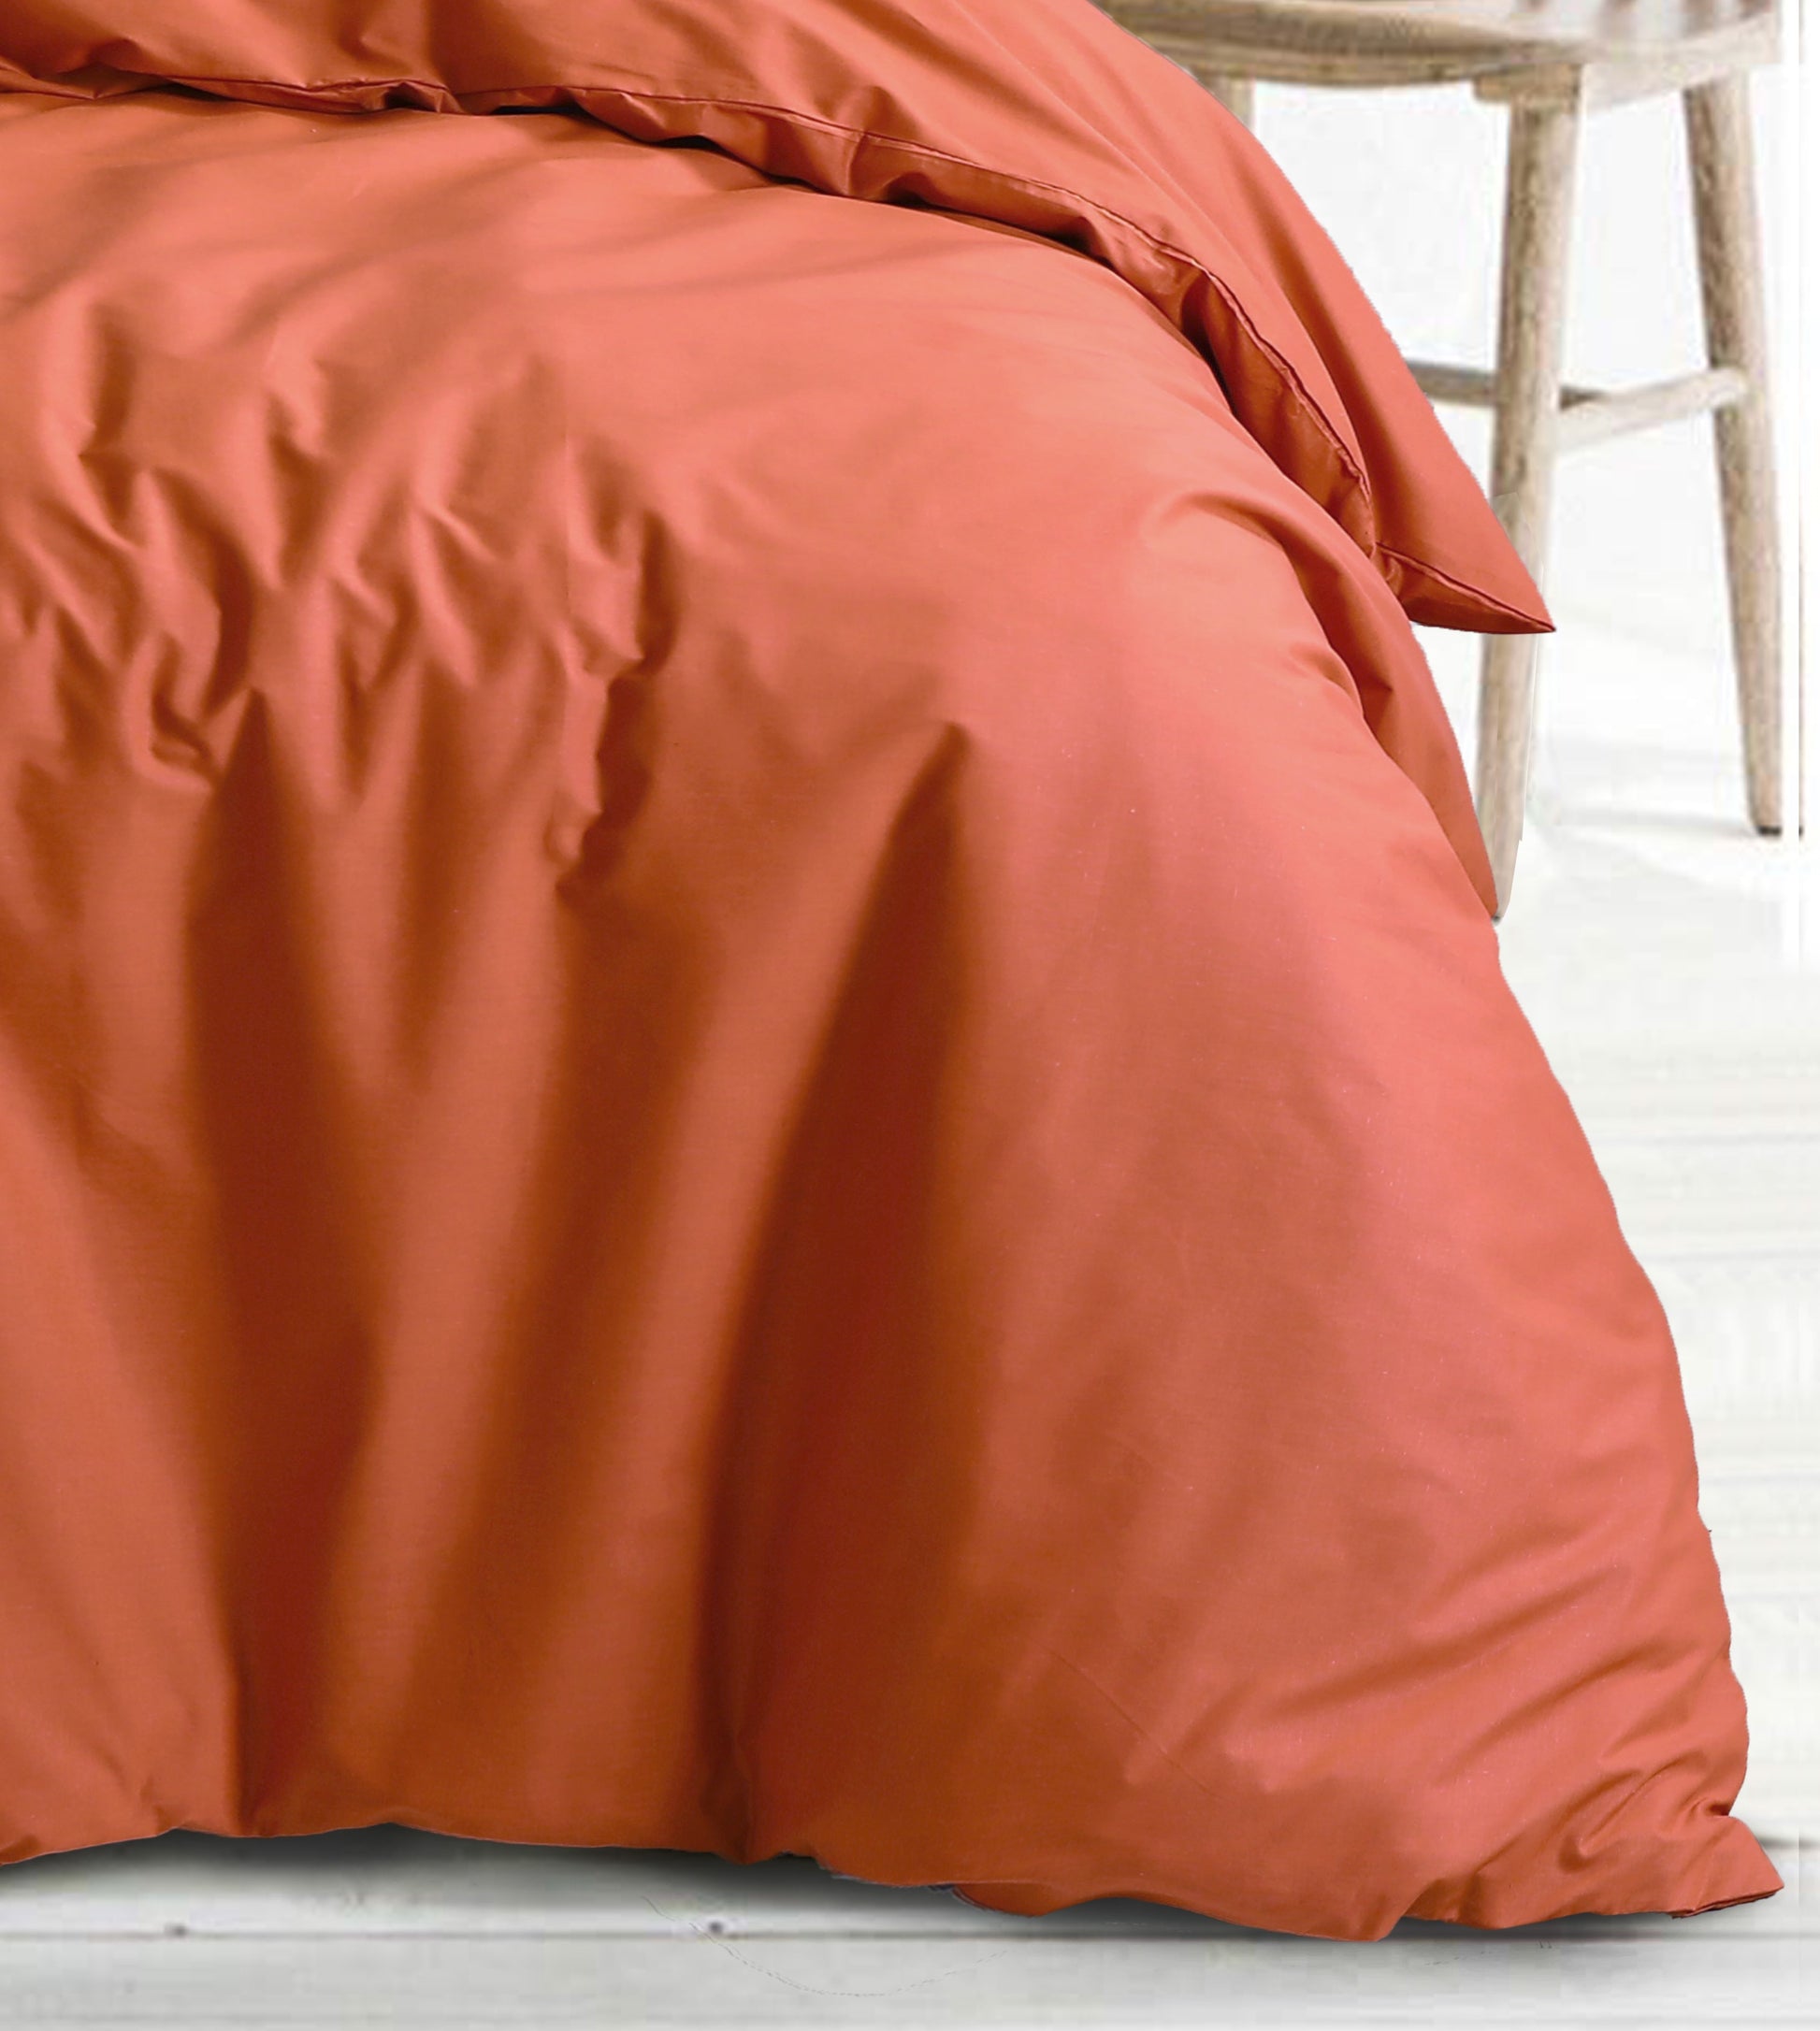 Doona Cover with European Pillow Covers | Royale Cotton Rust 